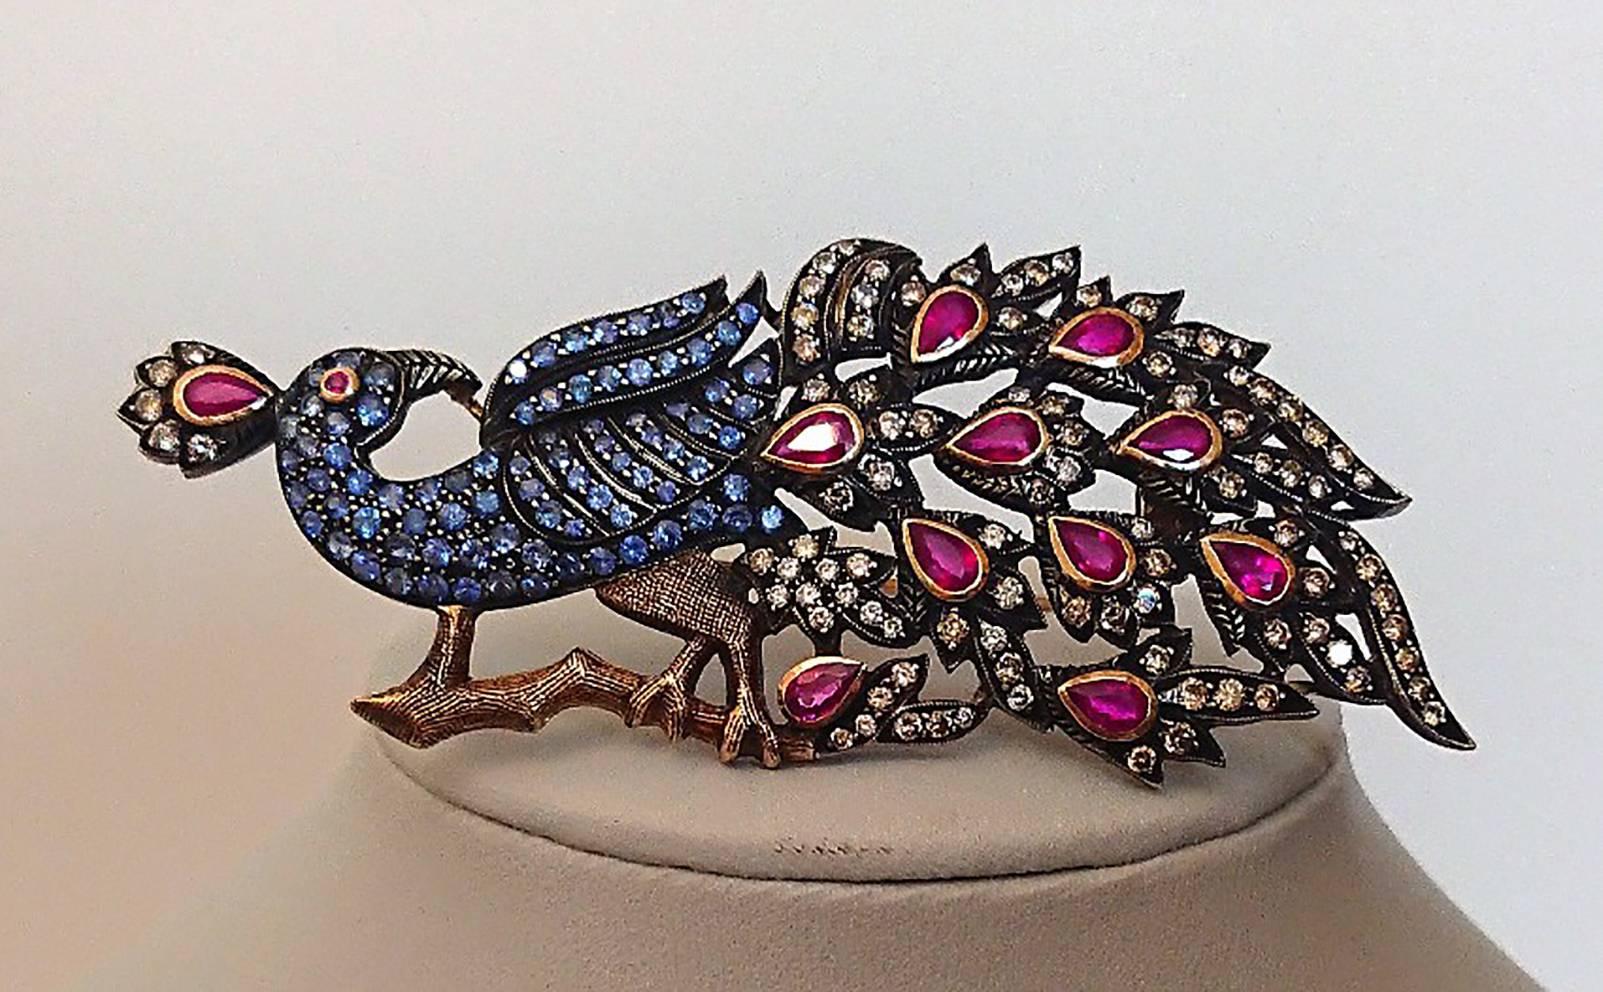 An amazing custom made peacock brooch with diamonds, Sapphires and rubies.
Measuring an impressive 7.5cm x 3.4cm
The main body of the peacock is set with approx 1.20ct of Sapphire.
The tail has 10 x 0.20ct pear rubies and an array of genuine